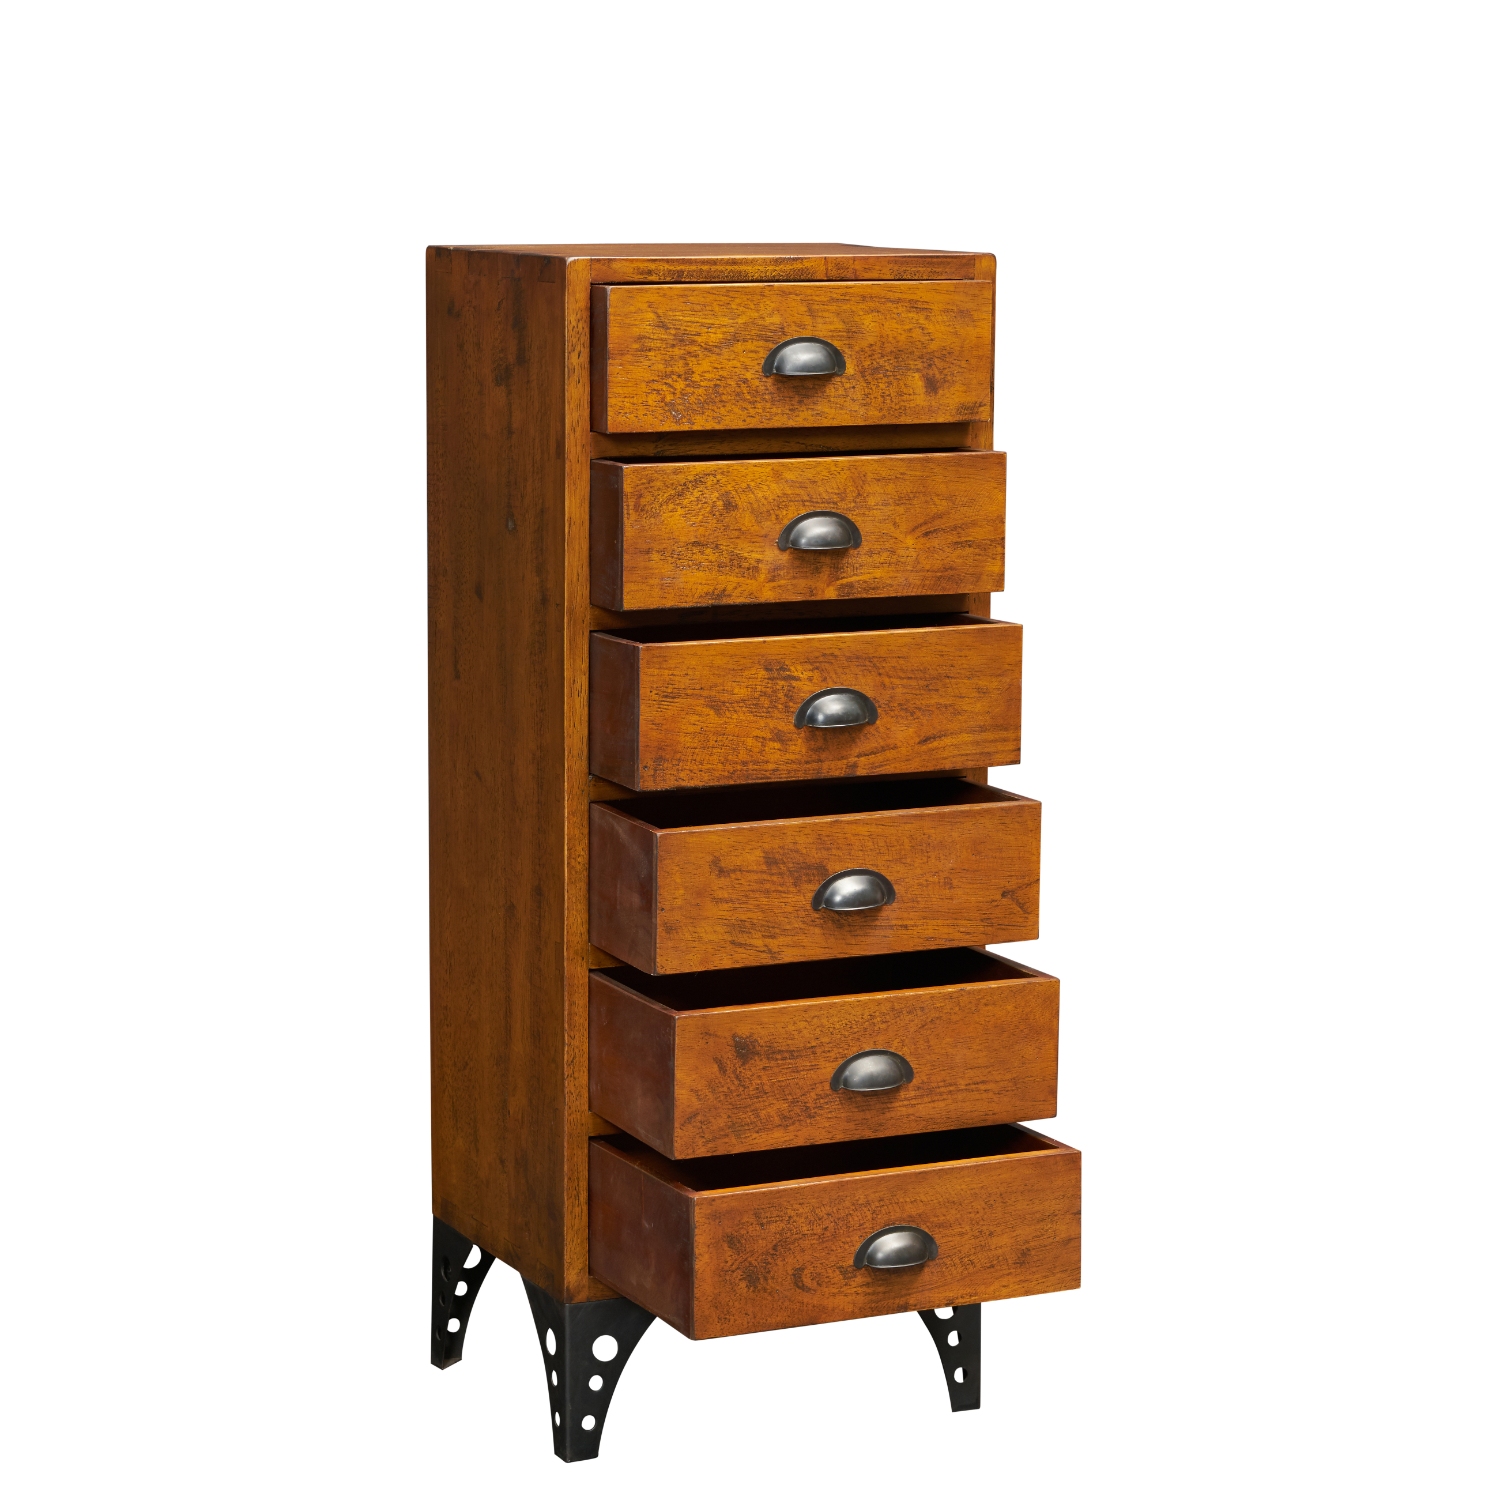 INDUSTRIAL CHEST OF DRAWERS